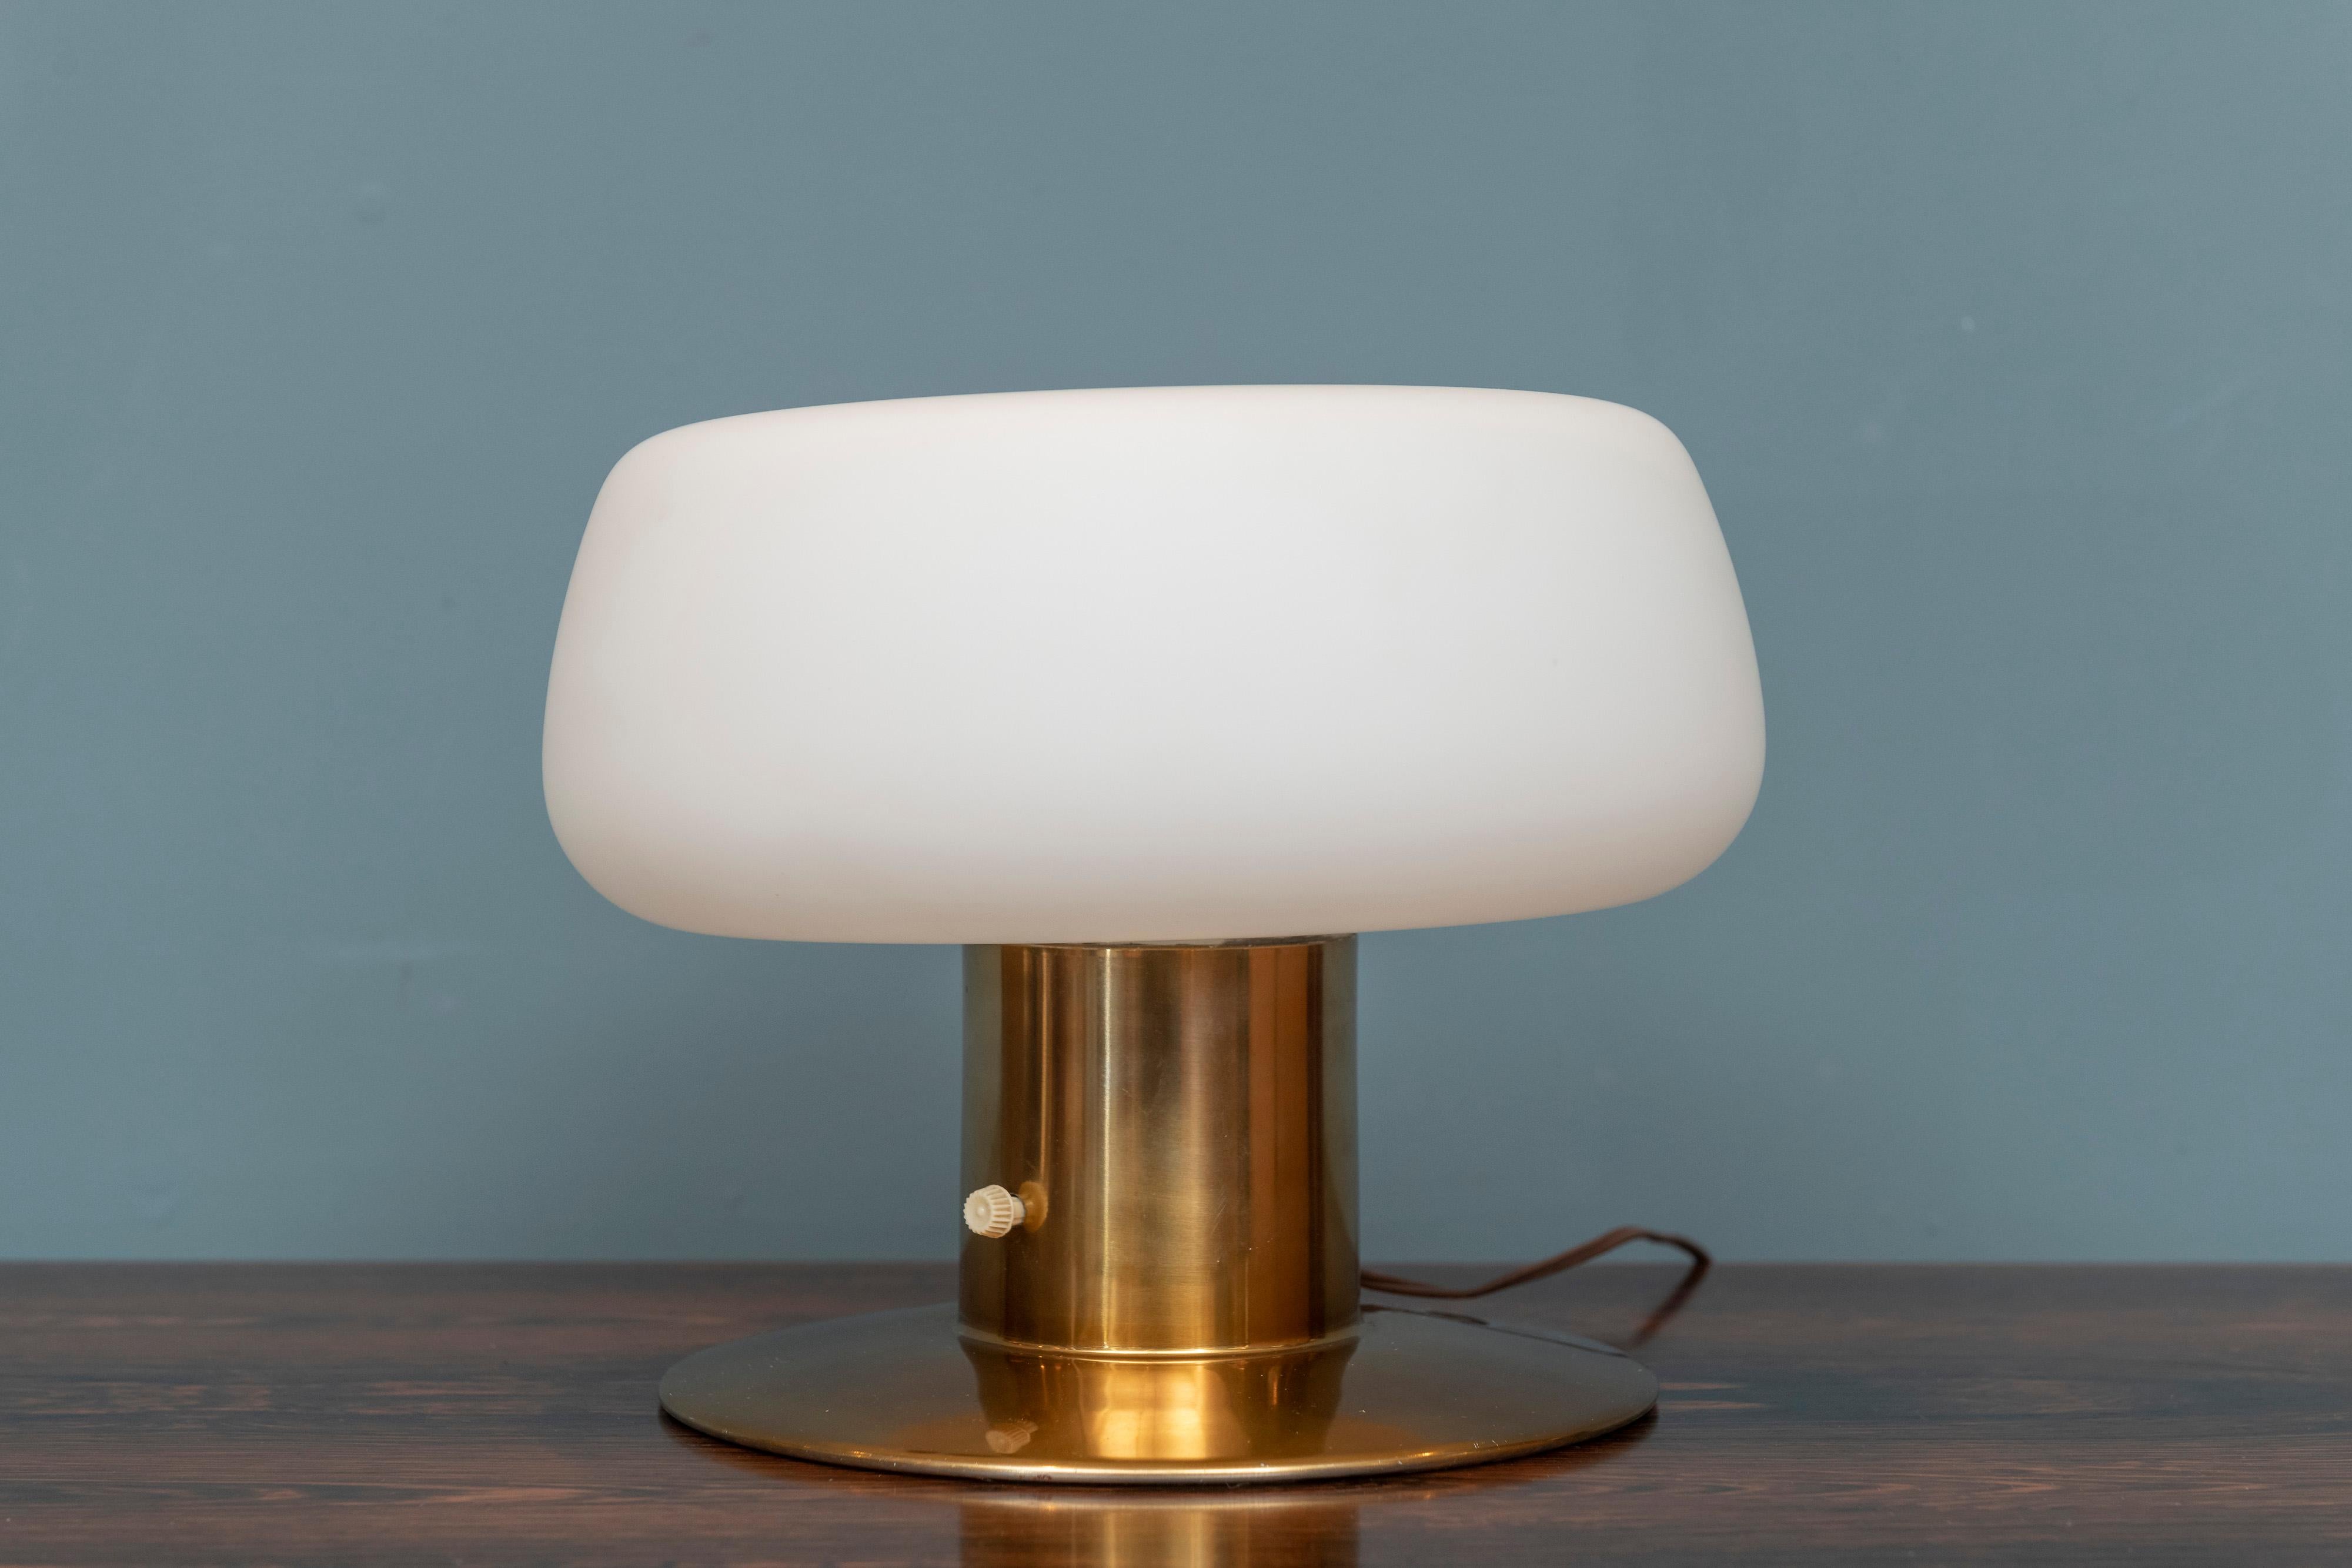 Mid-Century Modern mushroom table lamp by Laurel Lamp company. Rare model with a brass base and dimpled mushroom glass shade in good working condition.
New old stock example never used retains original factory tag and labels.